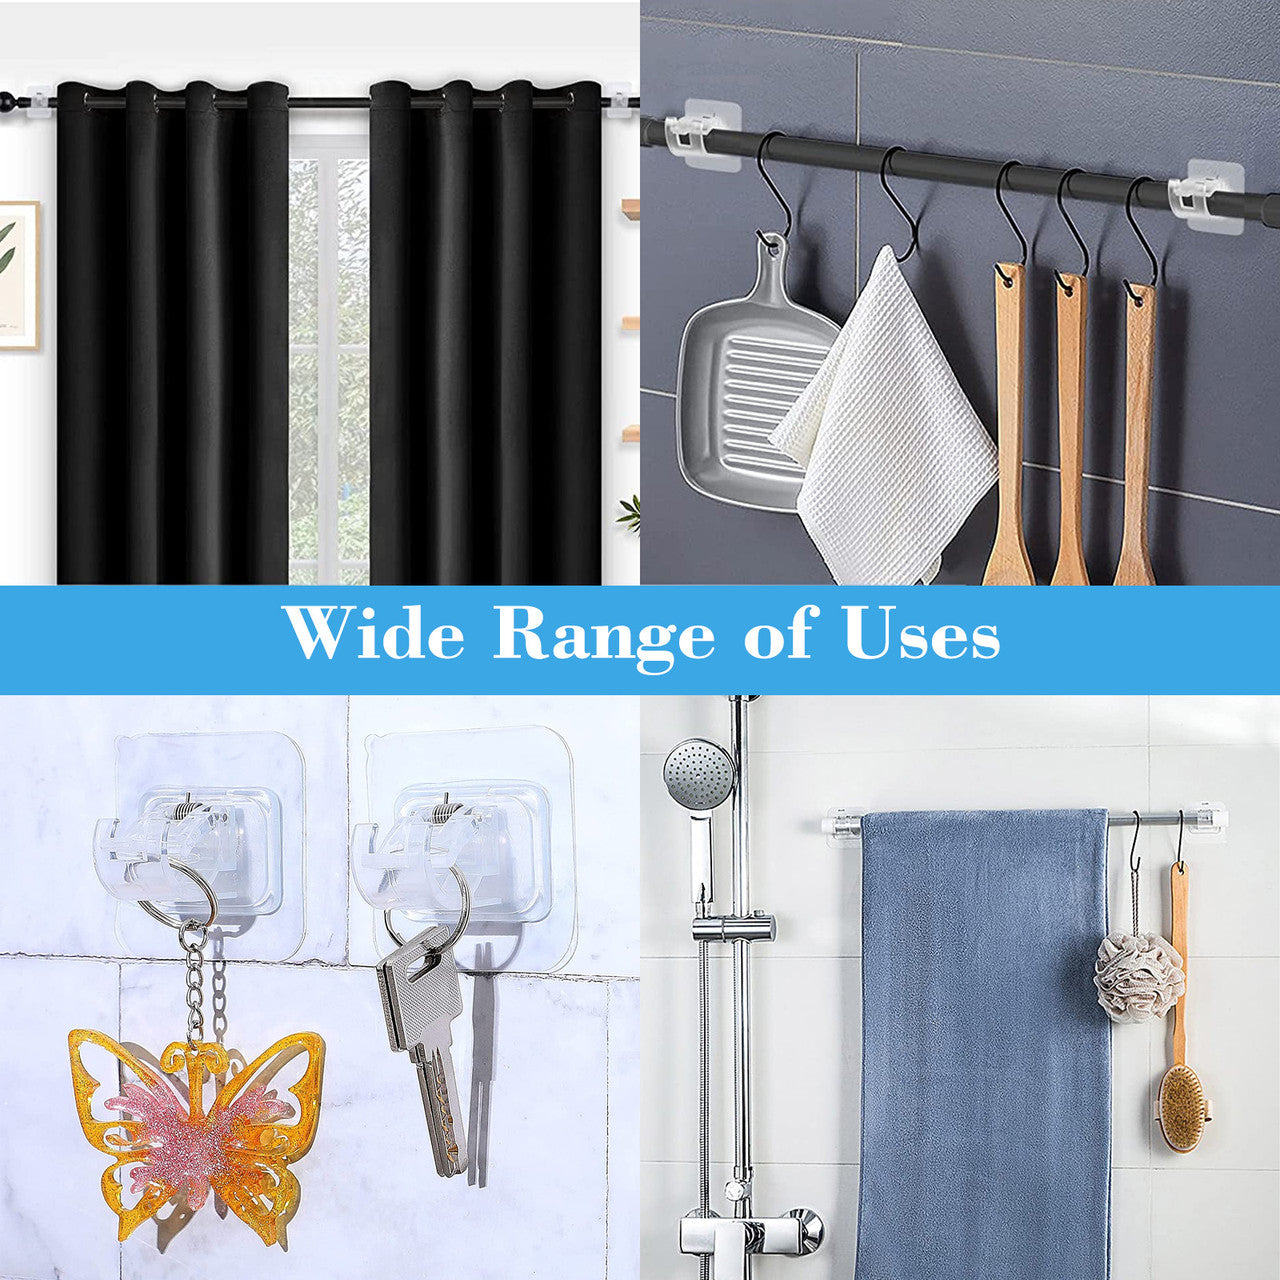 6 Packs Self Adhesive Wall Mount Holder - 2 CM No Drilling Curtain Rod Brackets Self Adhesive Wall Mount Curtain Rod Suitable